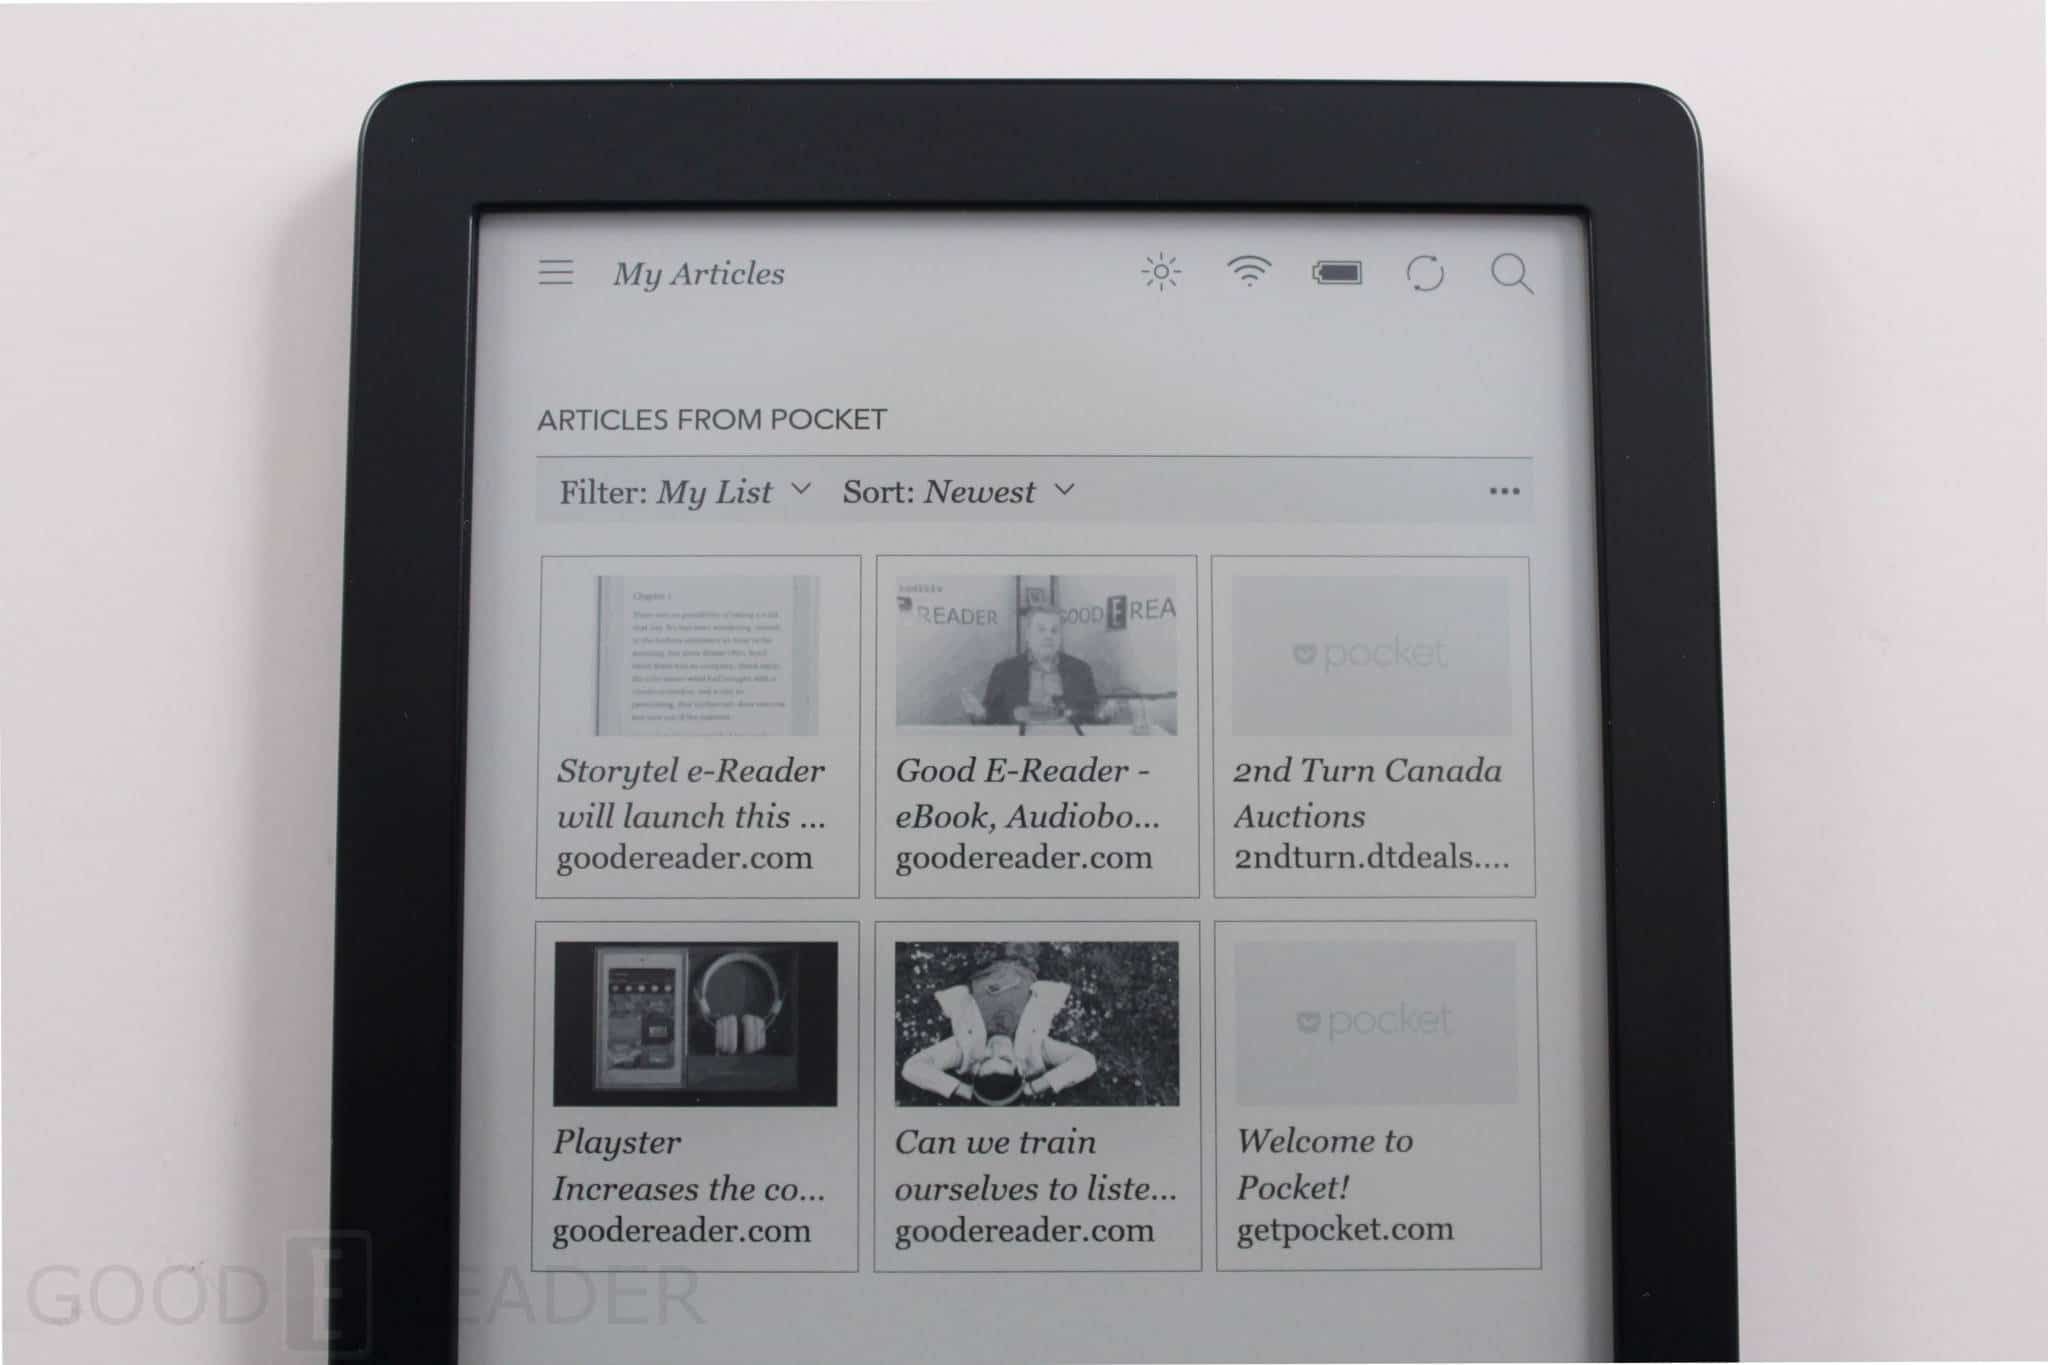 Enter for a chance to win a new Kobo Clara HD eReader from Best Buy